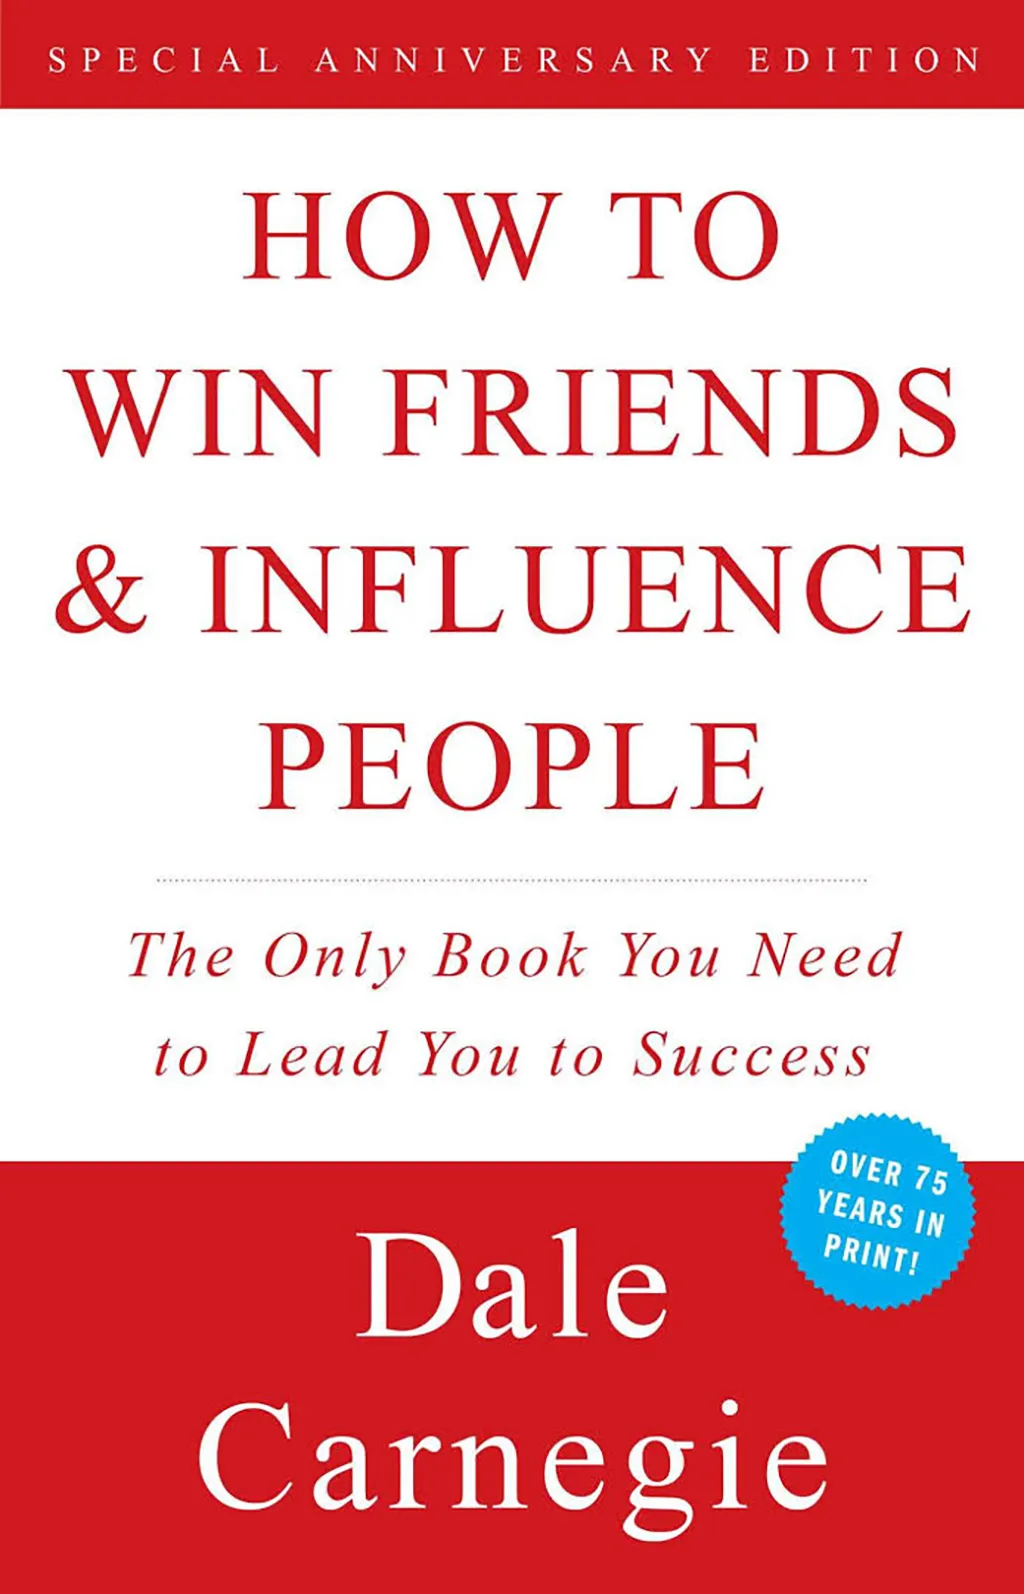 how to win friends and influence people, books every man should read